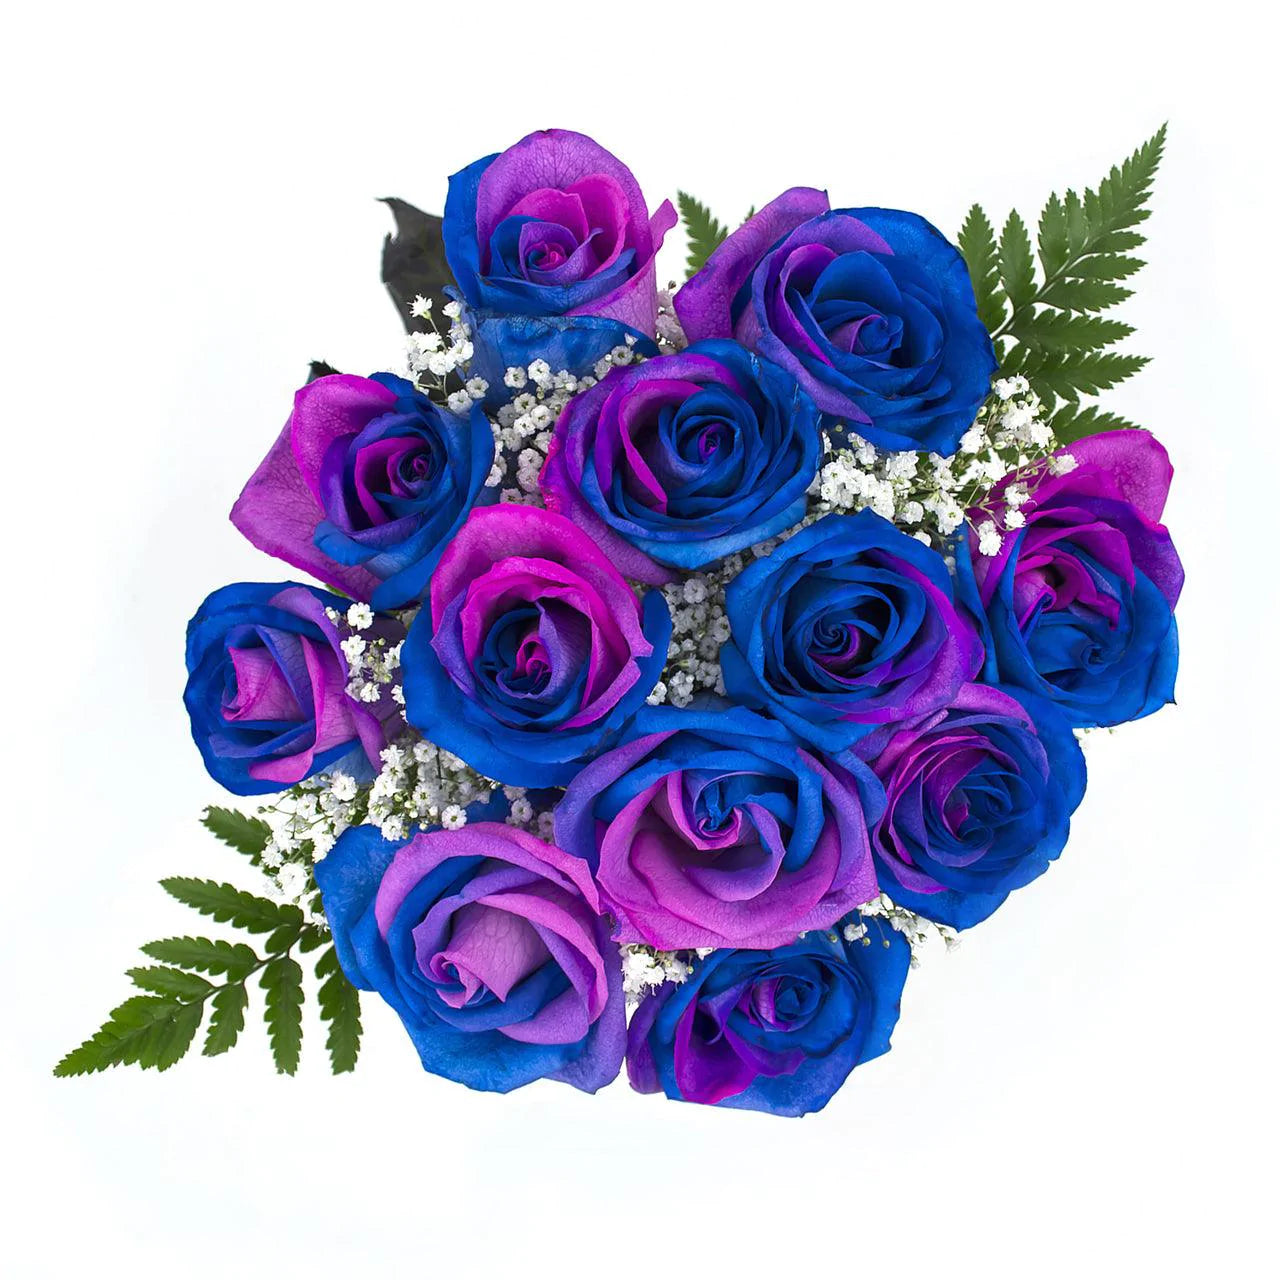 Pink and Blue 12-stem rose bouquets - 4